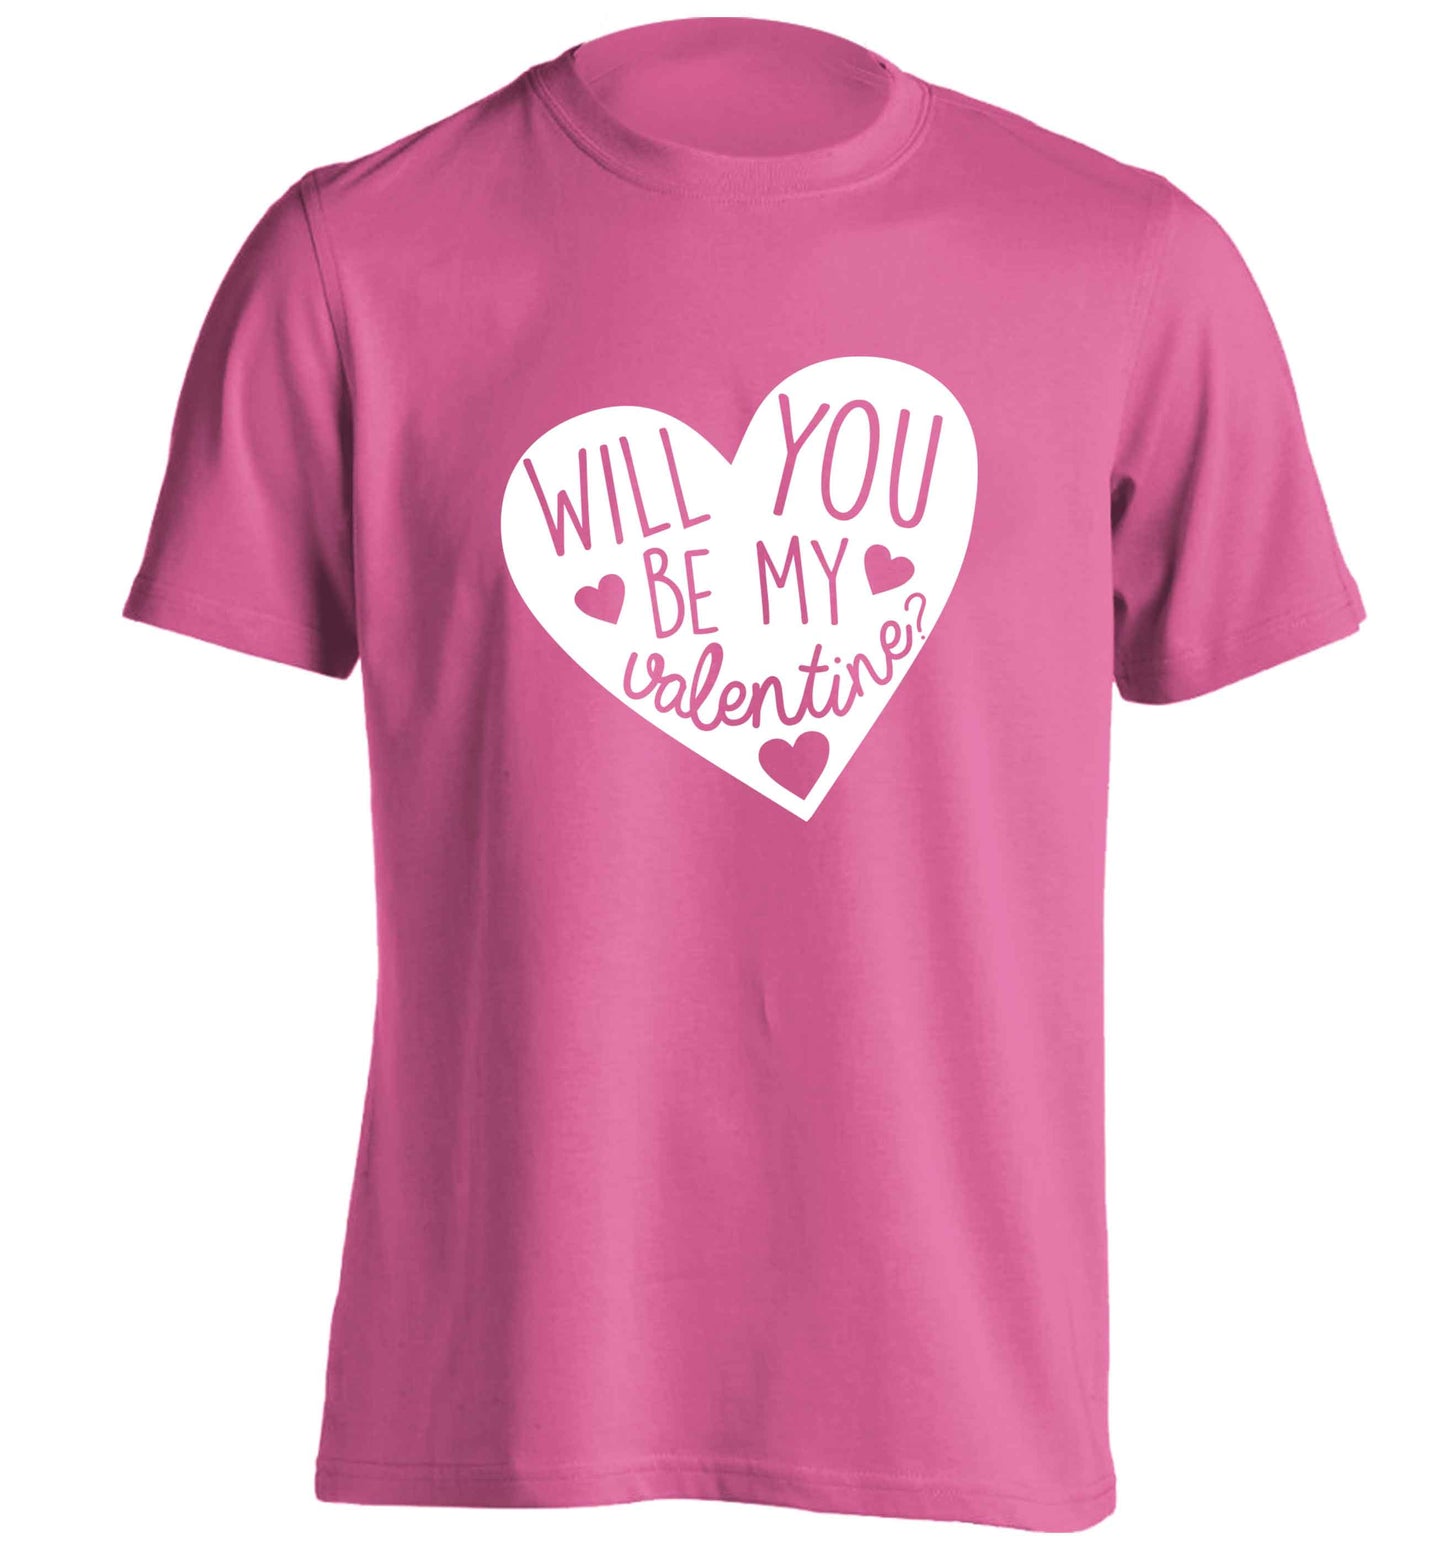 Will you be my valentine? adults unisex pink Tshirt 2XL